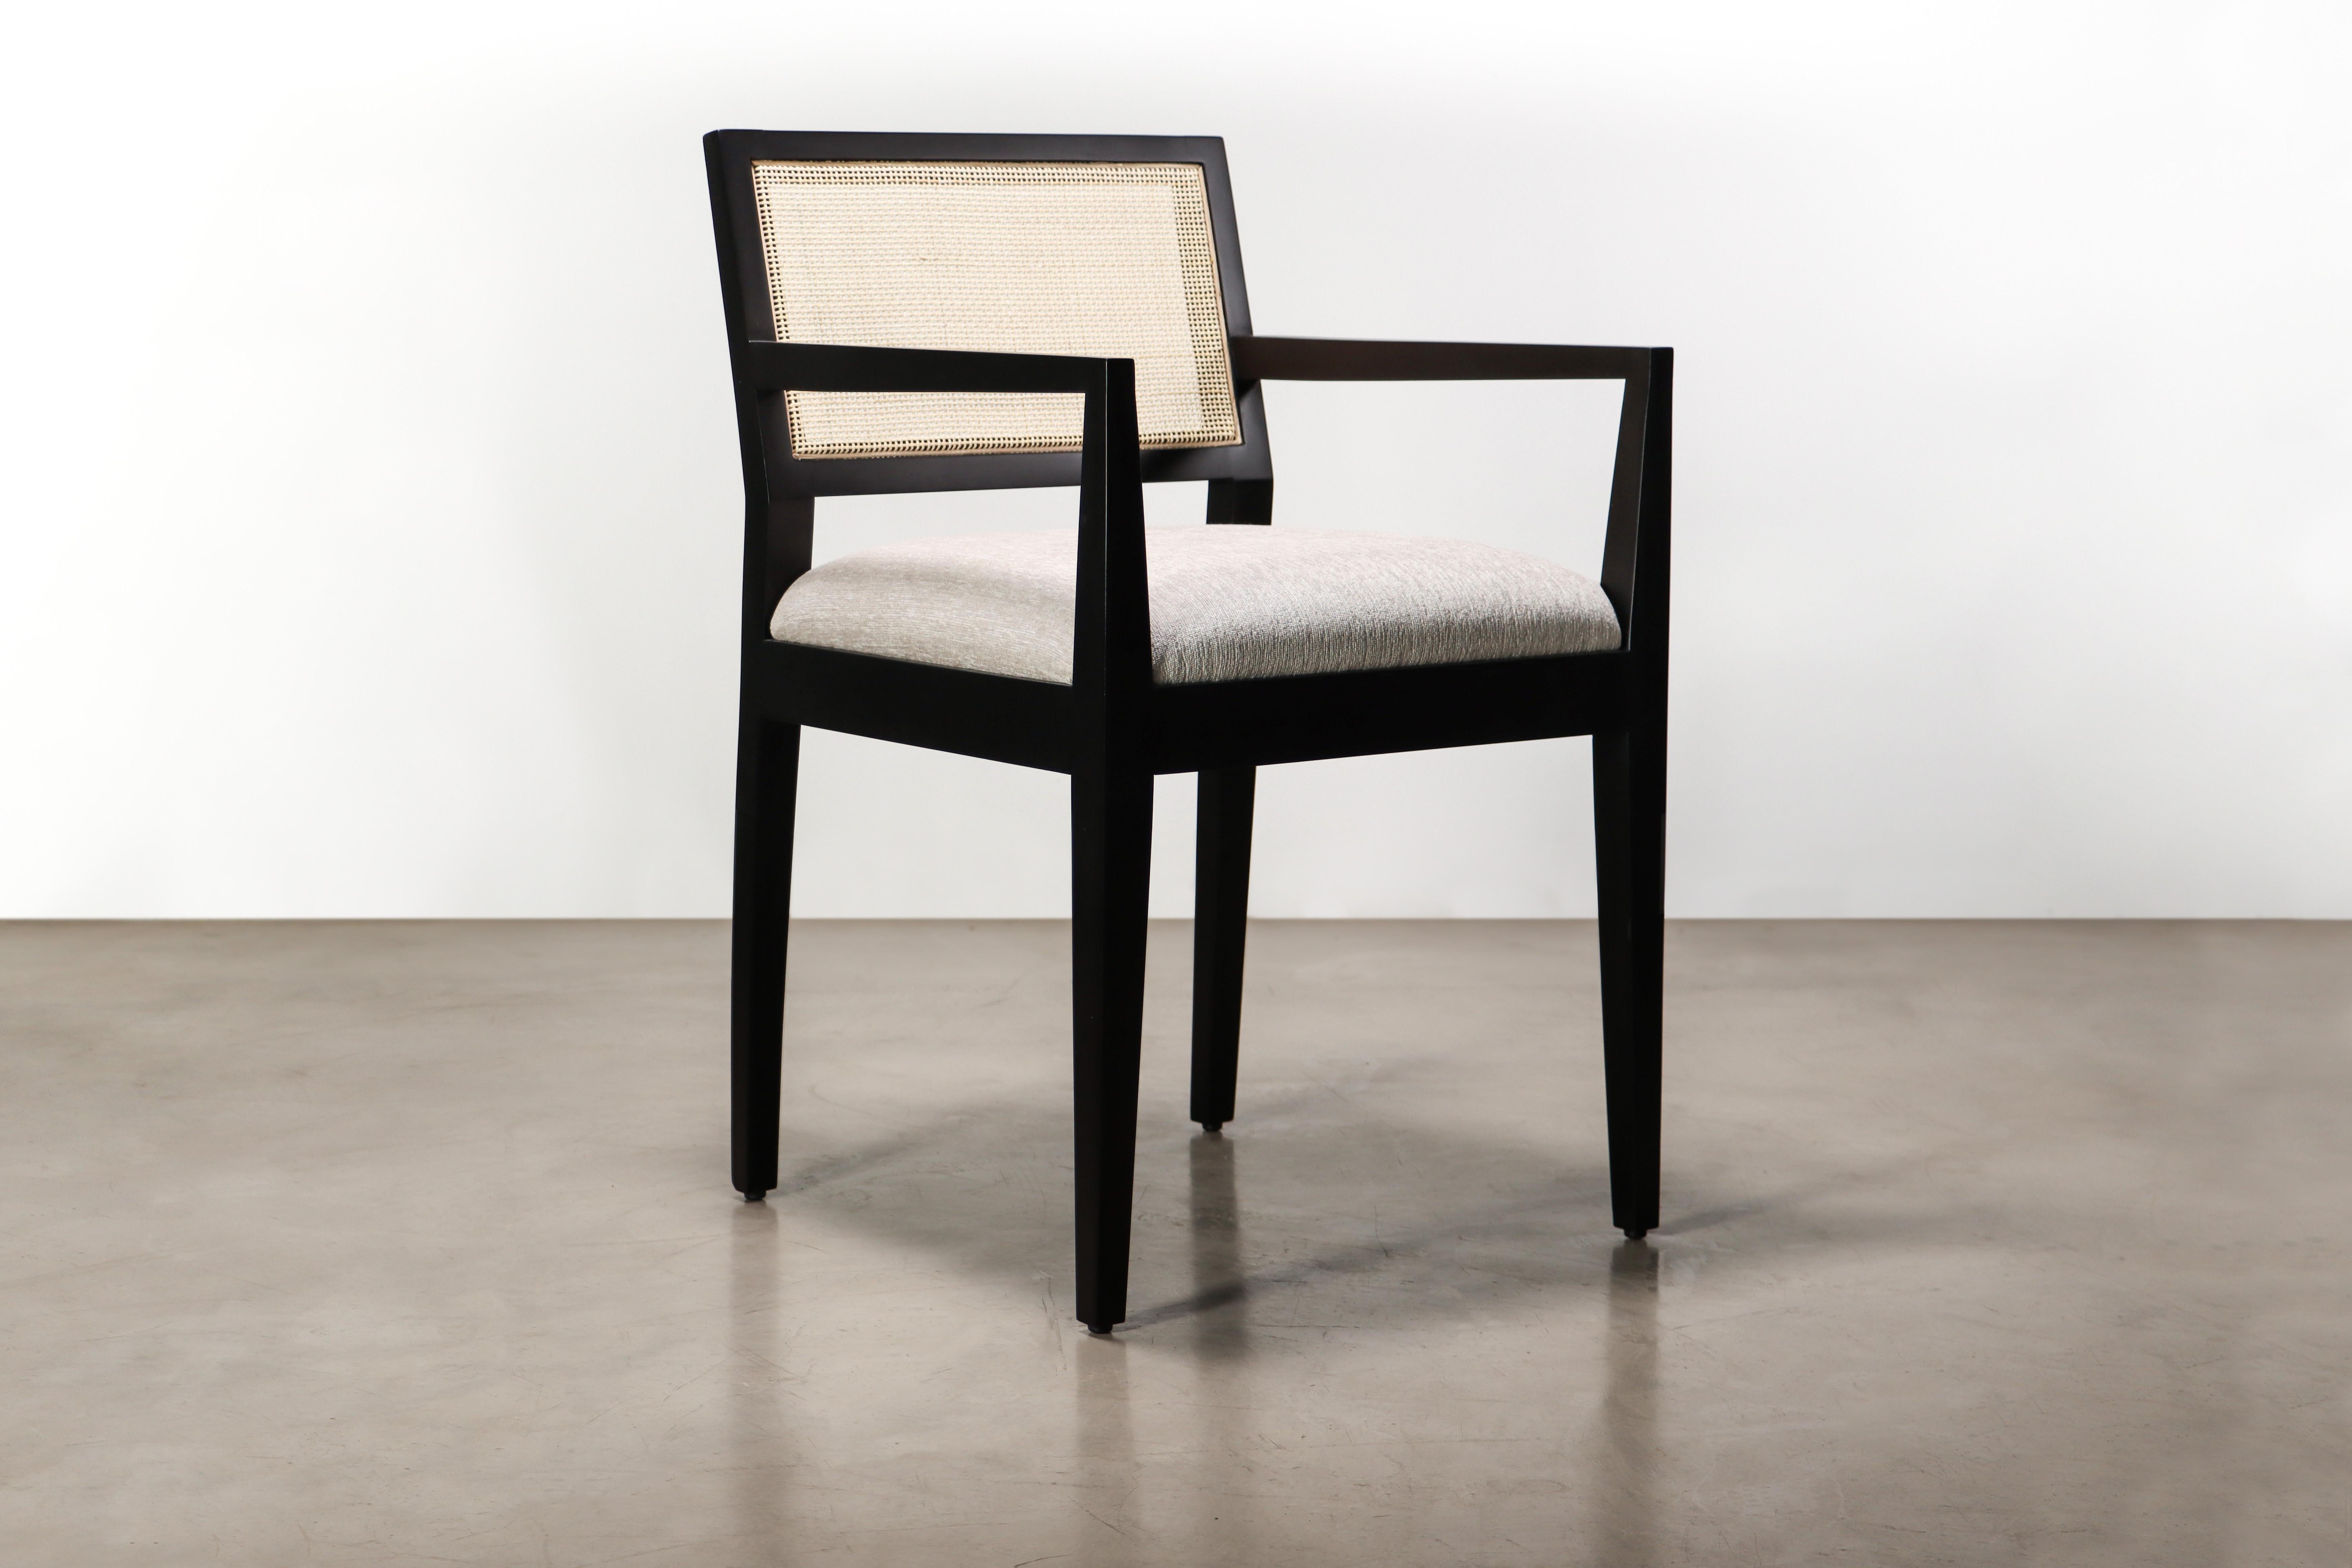 Recoleta Modern armchair with caned back in ebonized wood by Costantini

Measurements are 20